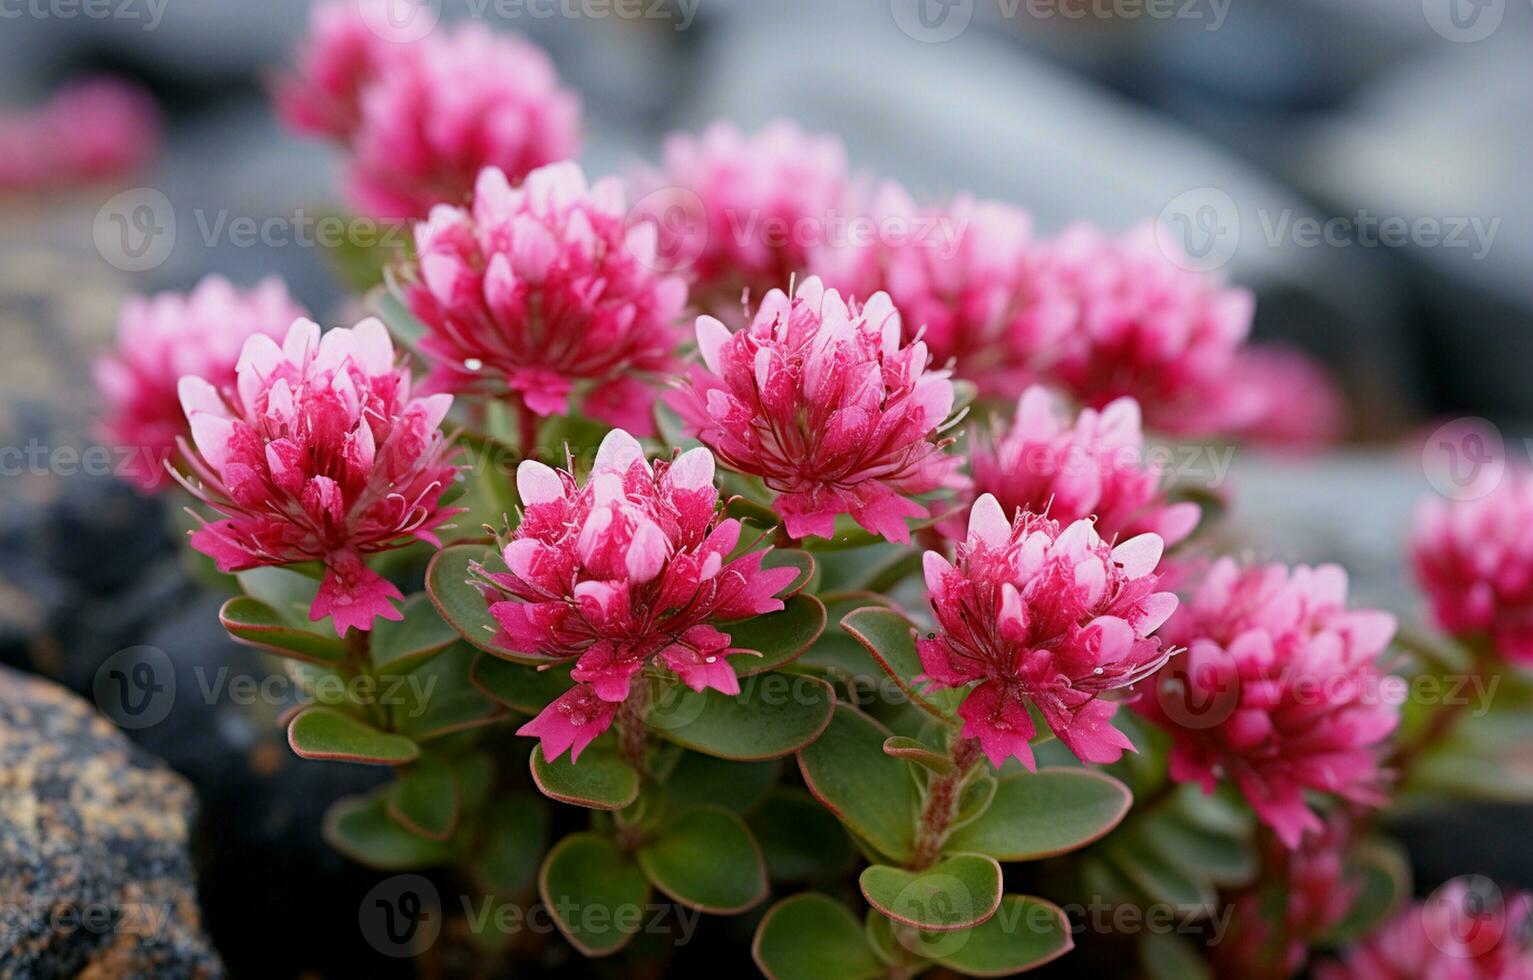 Here is a close-up view of the Rhodiola rosea arctic flower. photo